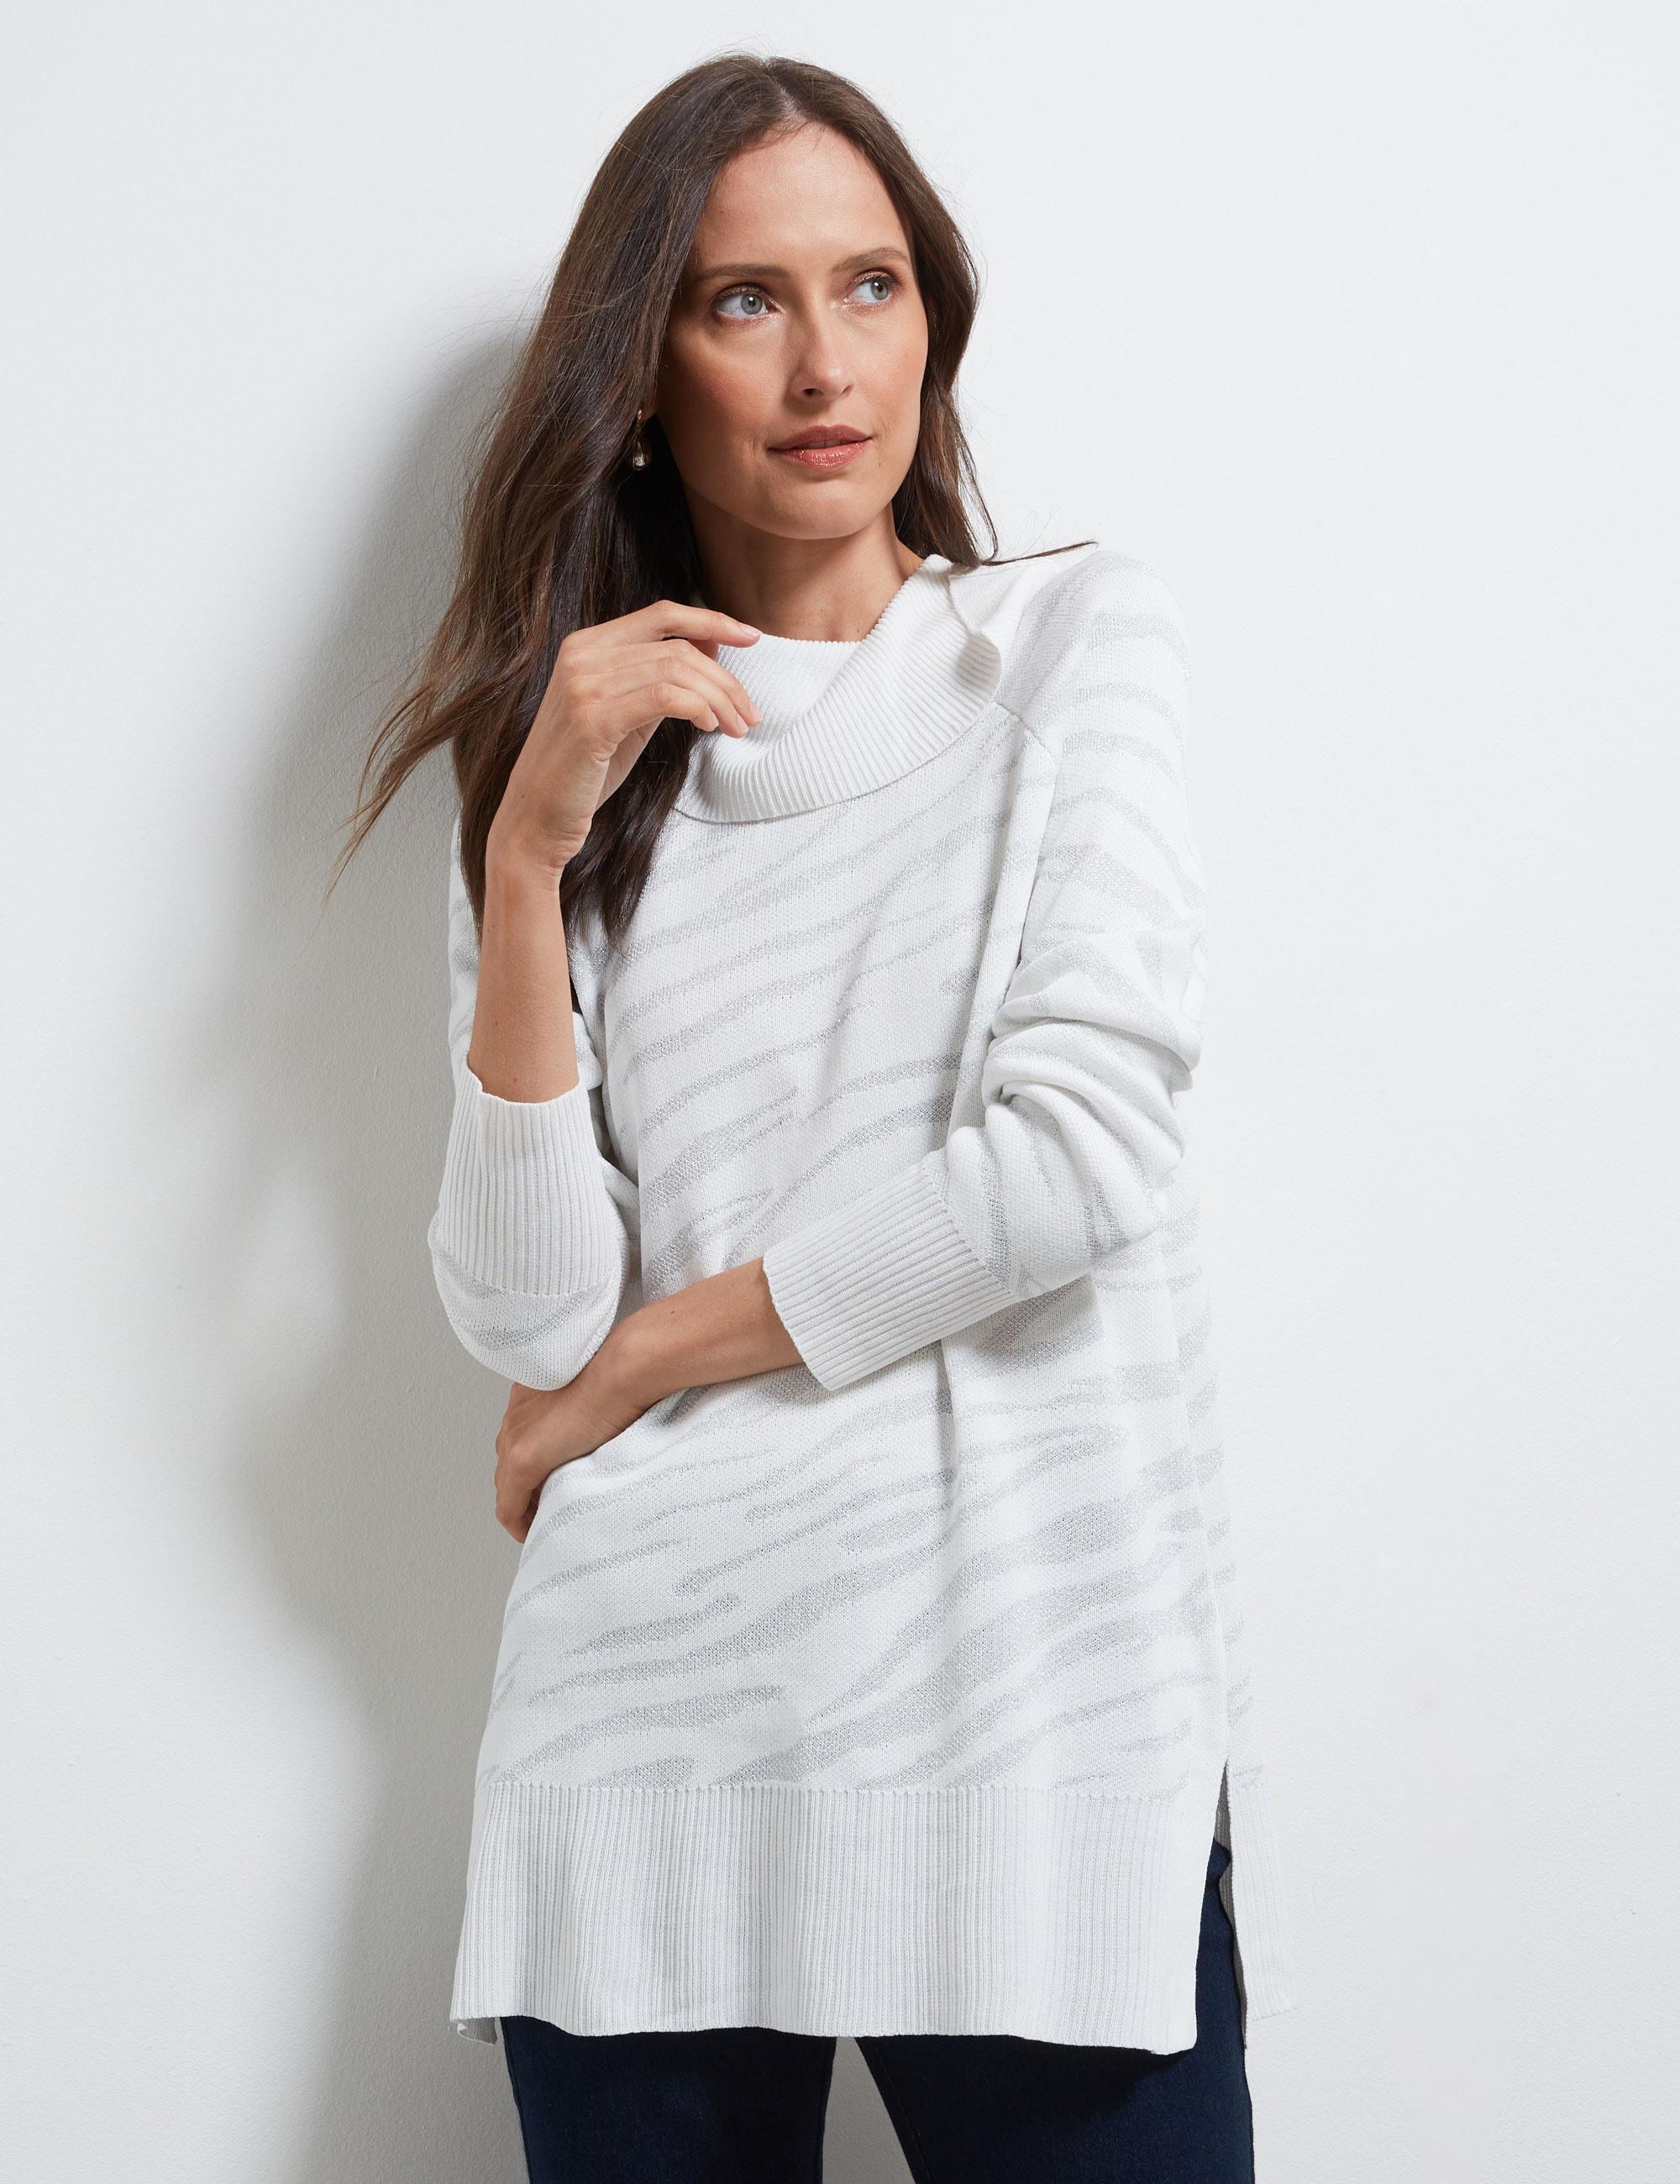 NONI B - Womens Jumper - Long Winter Sweater - White Pullover - Zebra - Casual - 3/4 Sleeve - Striped - Cowl Neck - Warm Work Clothing - Comfy Fashion